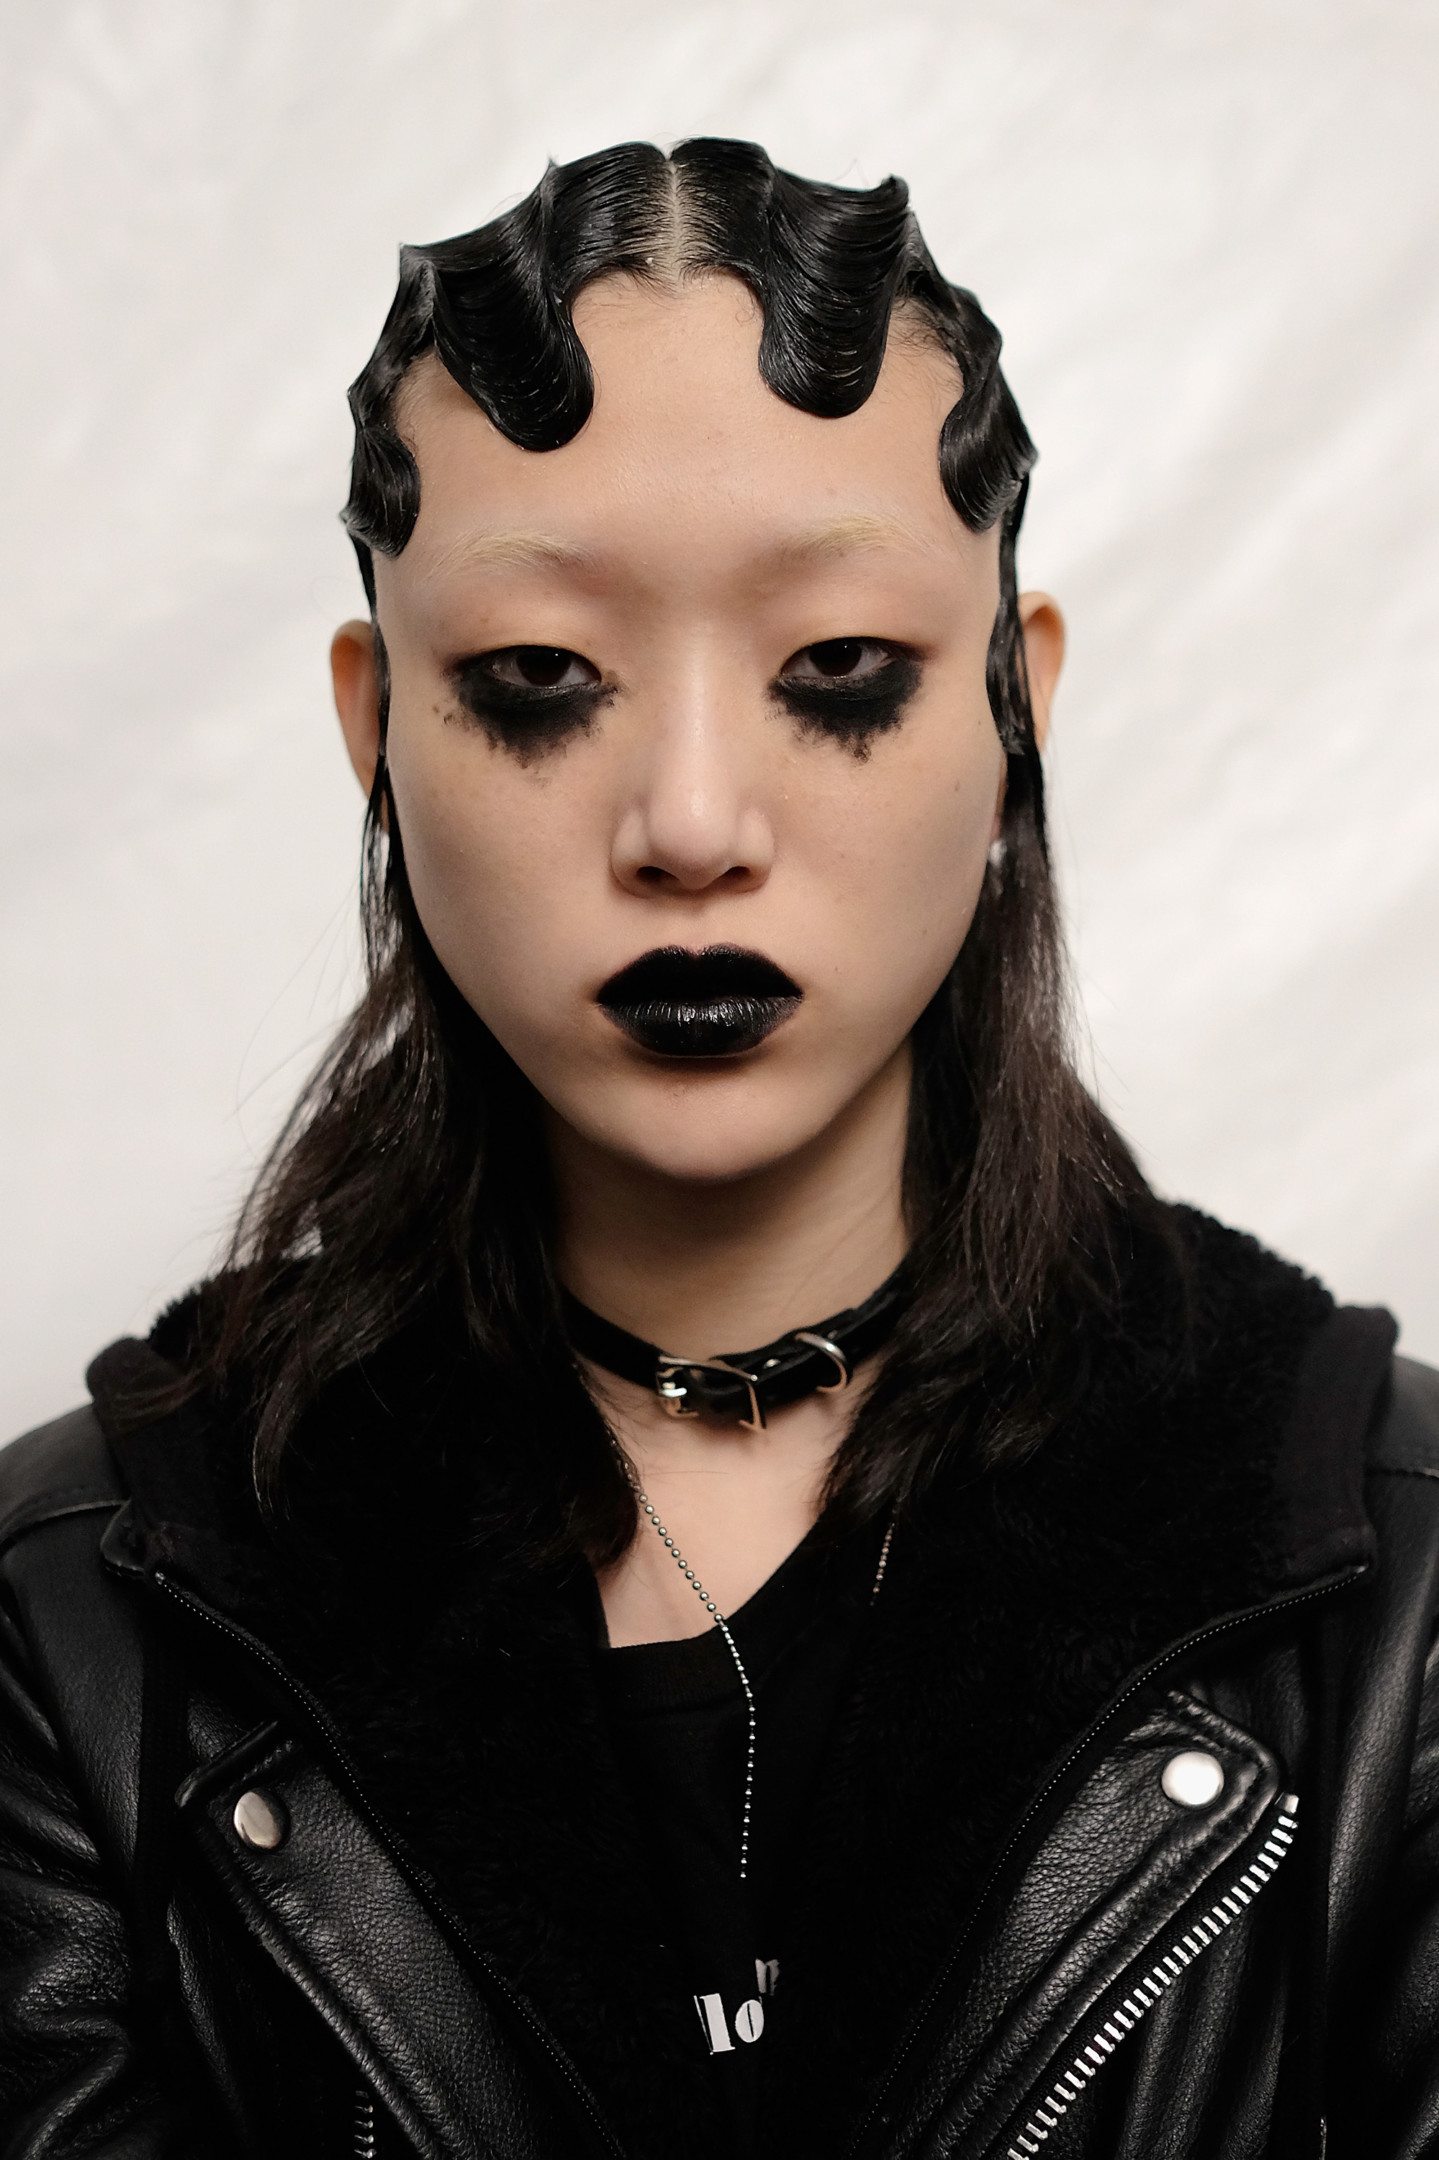 Why Do We Have a Never-Ending Fascination With Goth Makeup? - FASHION  Magazine